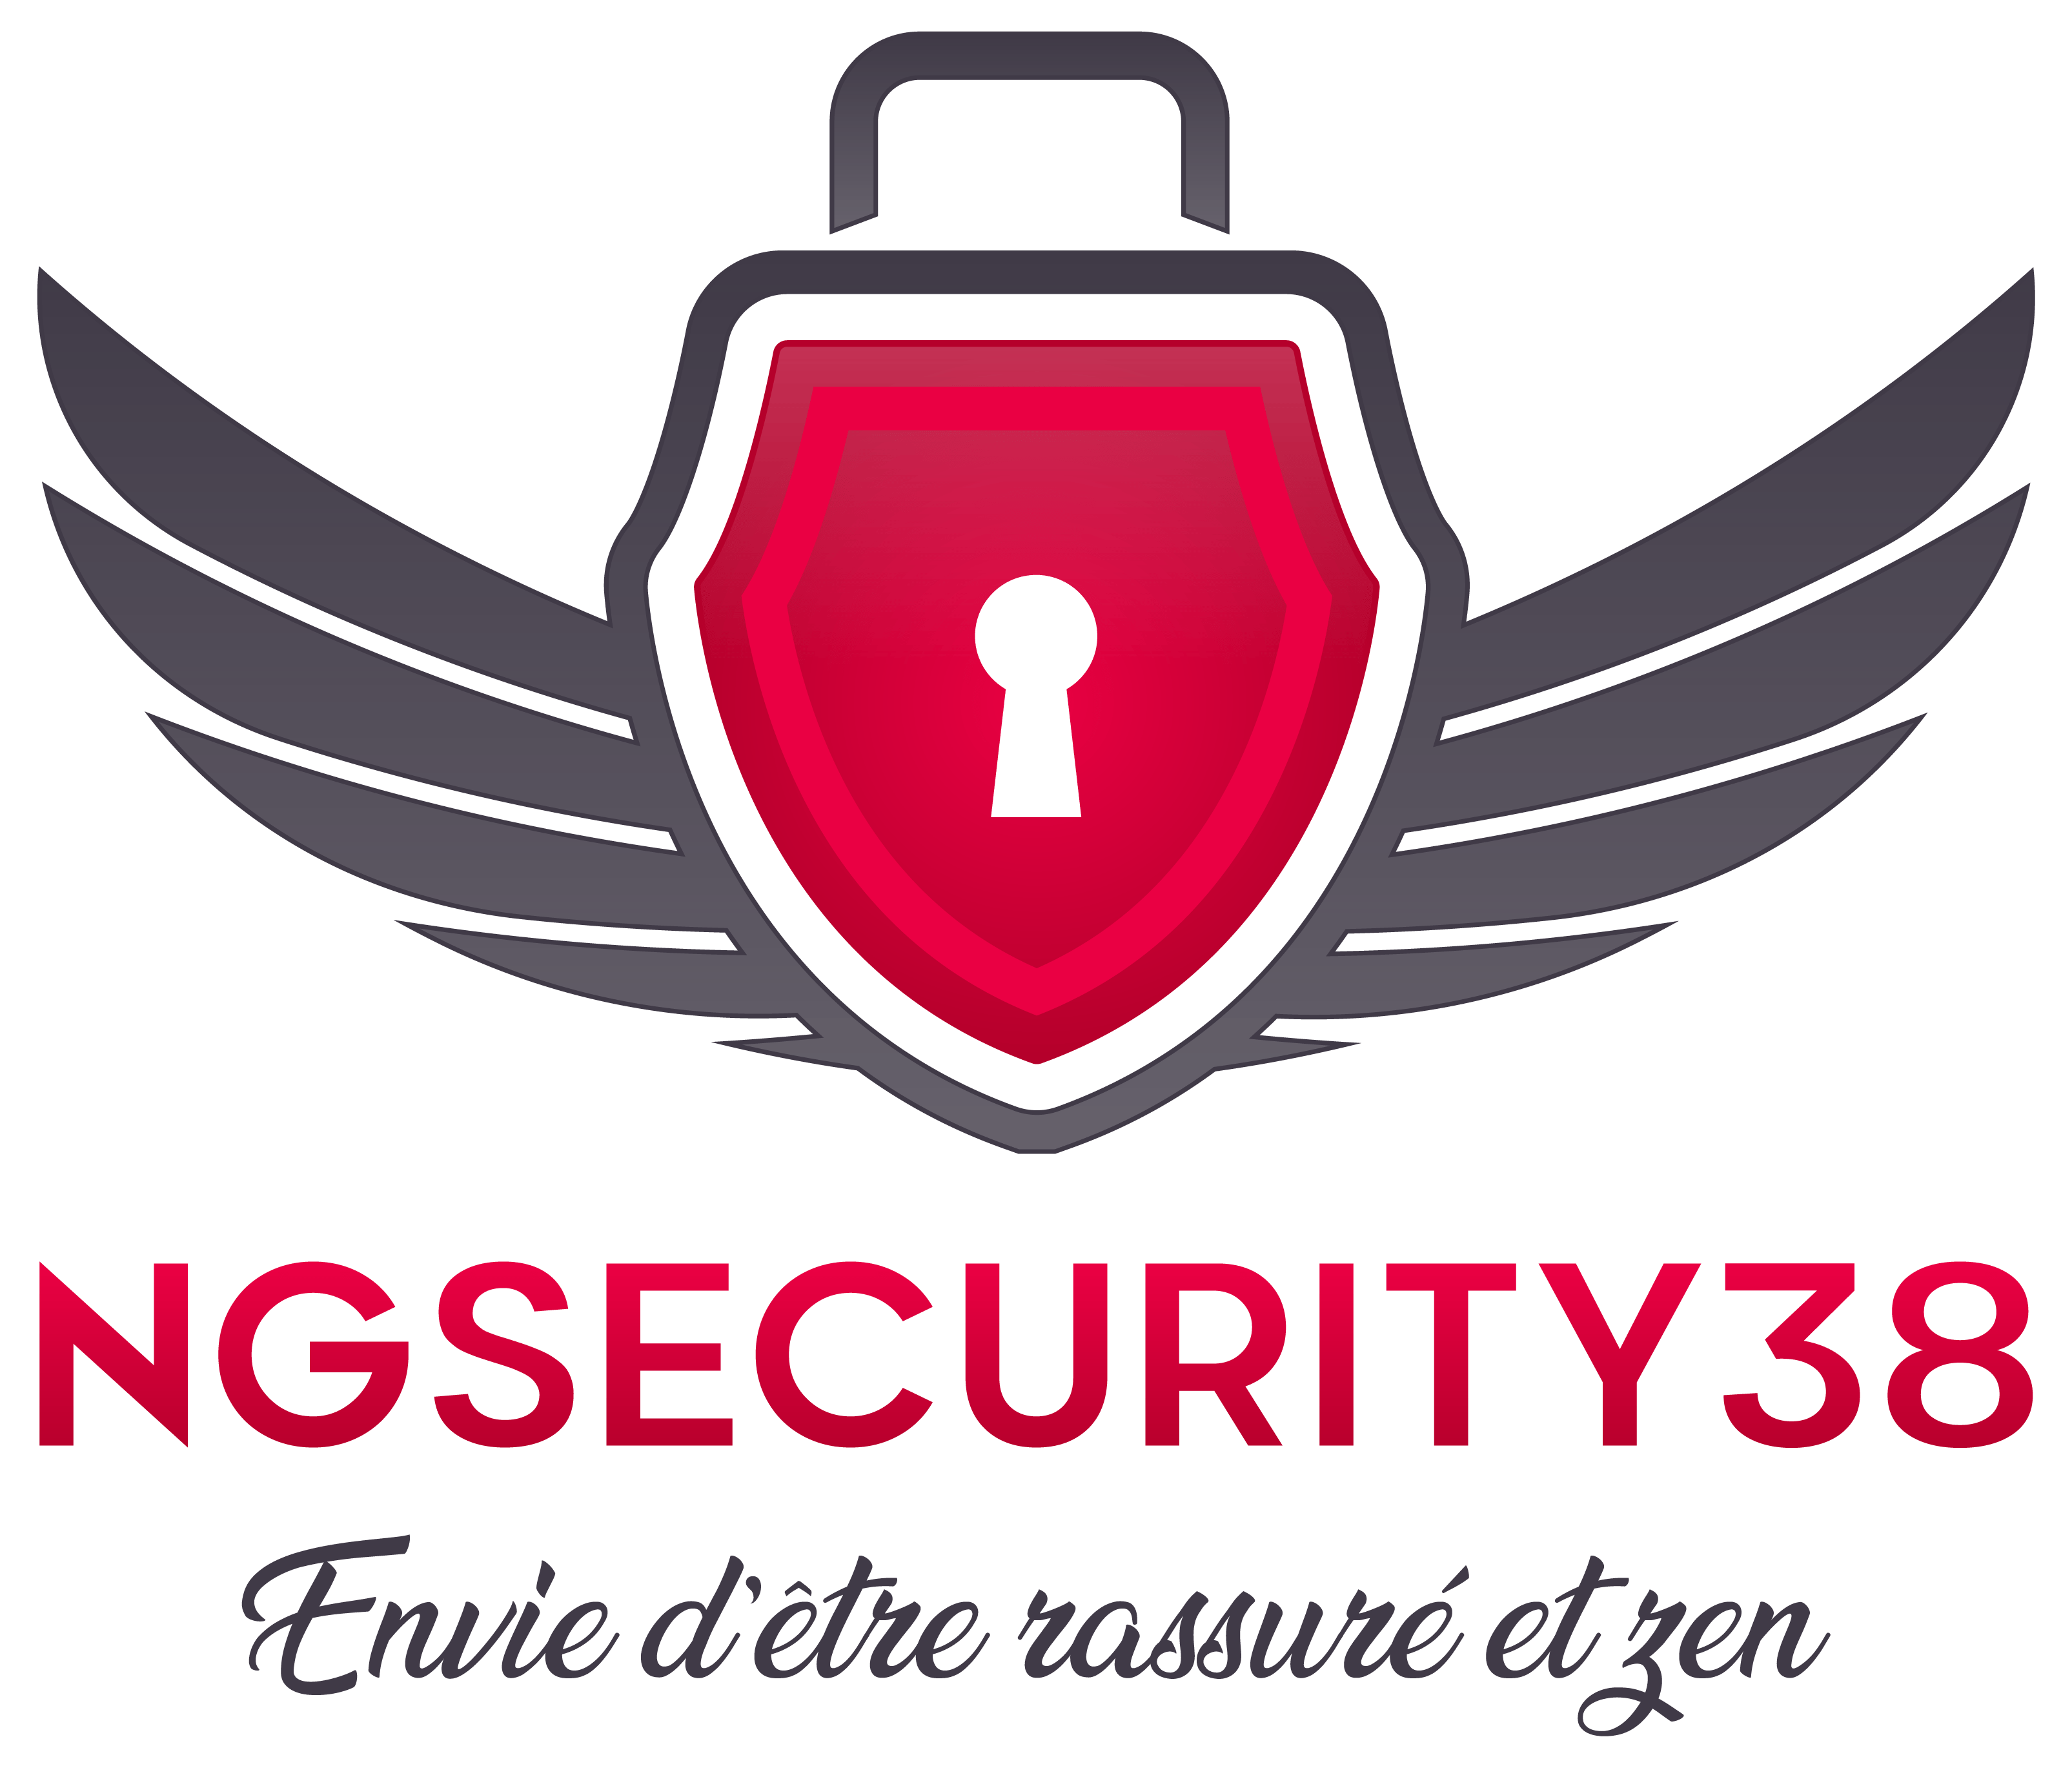 NGsecurity38